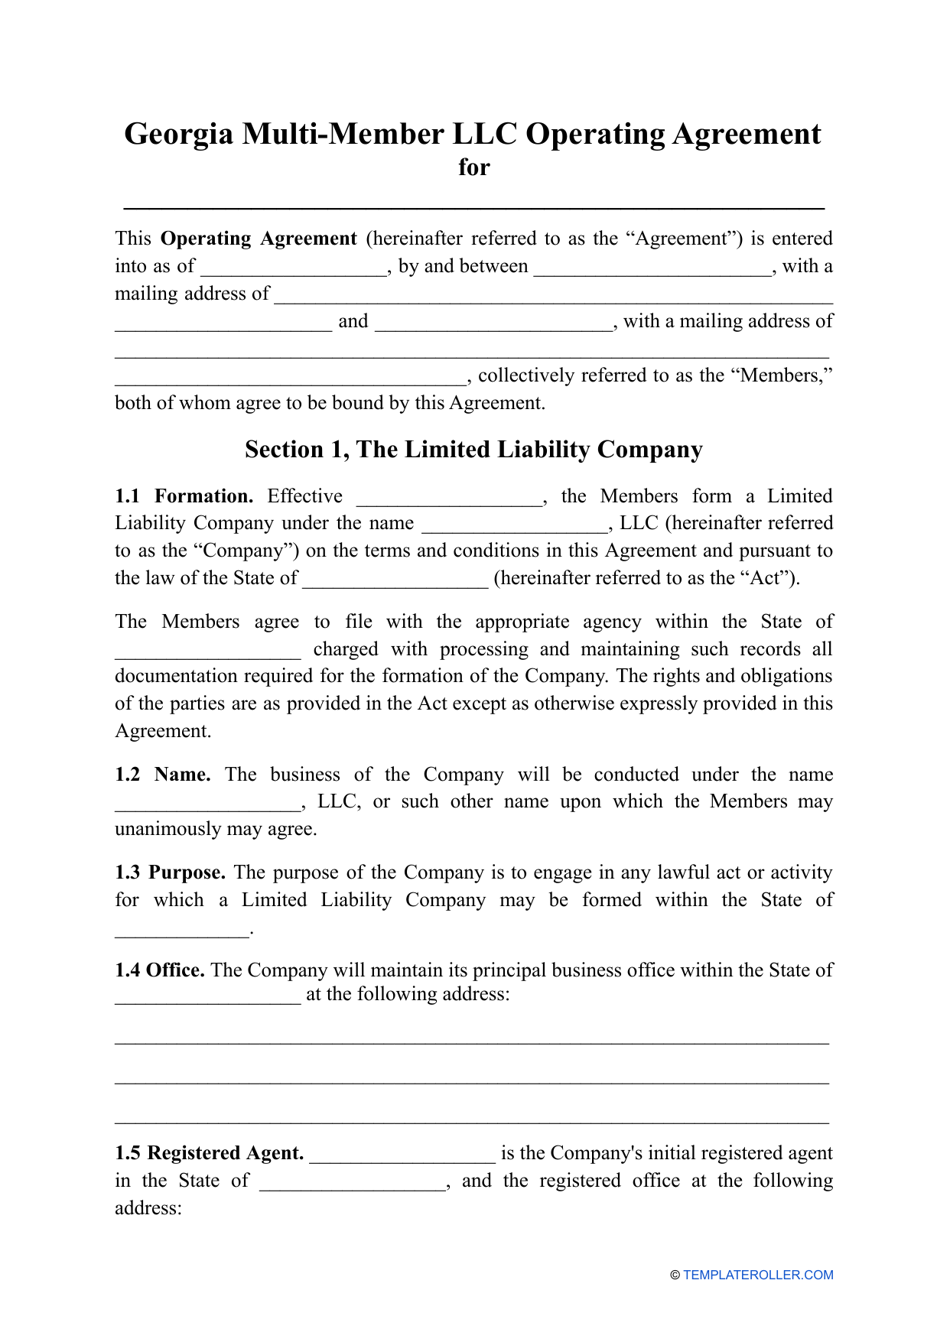 Multi-Member LLC Operating Agreement Template - Georgia (United States), Page 1